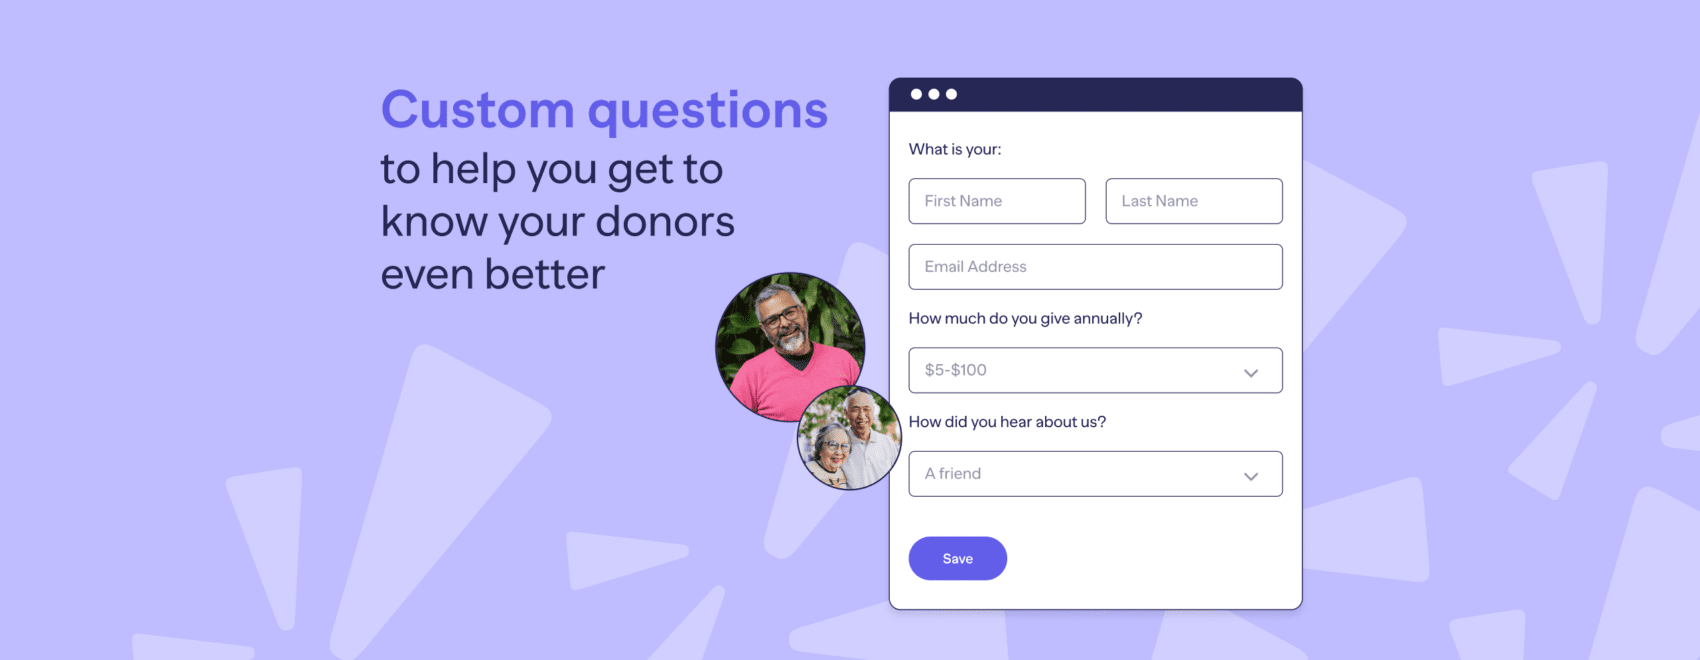 Custom questions to help you get to know your donors even better